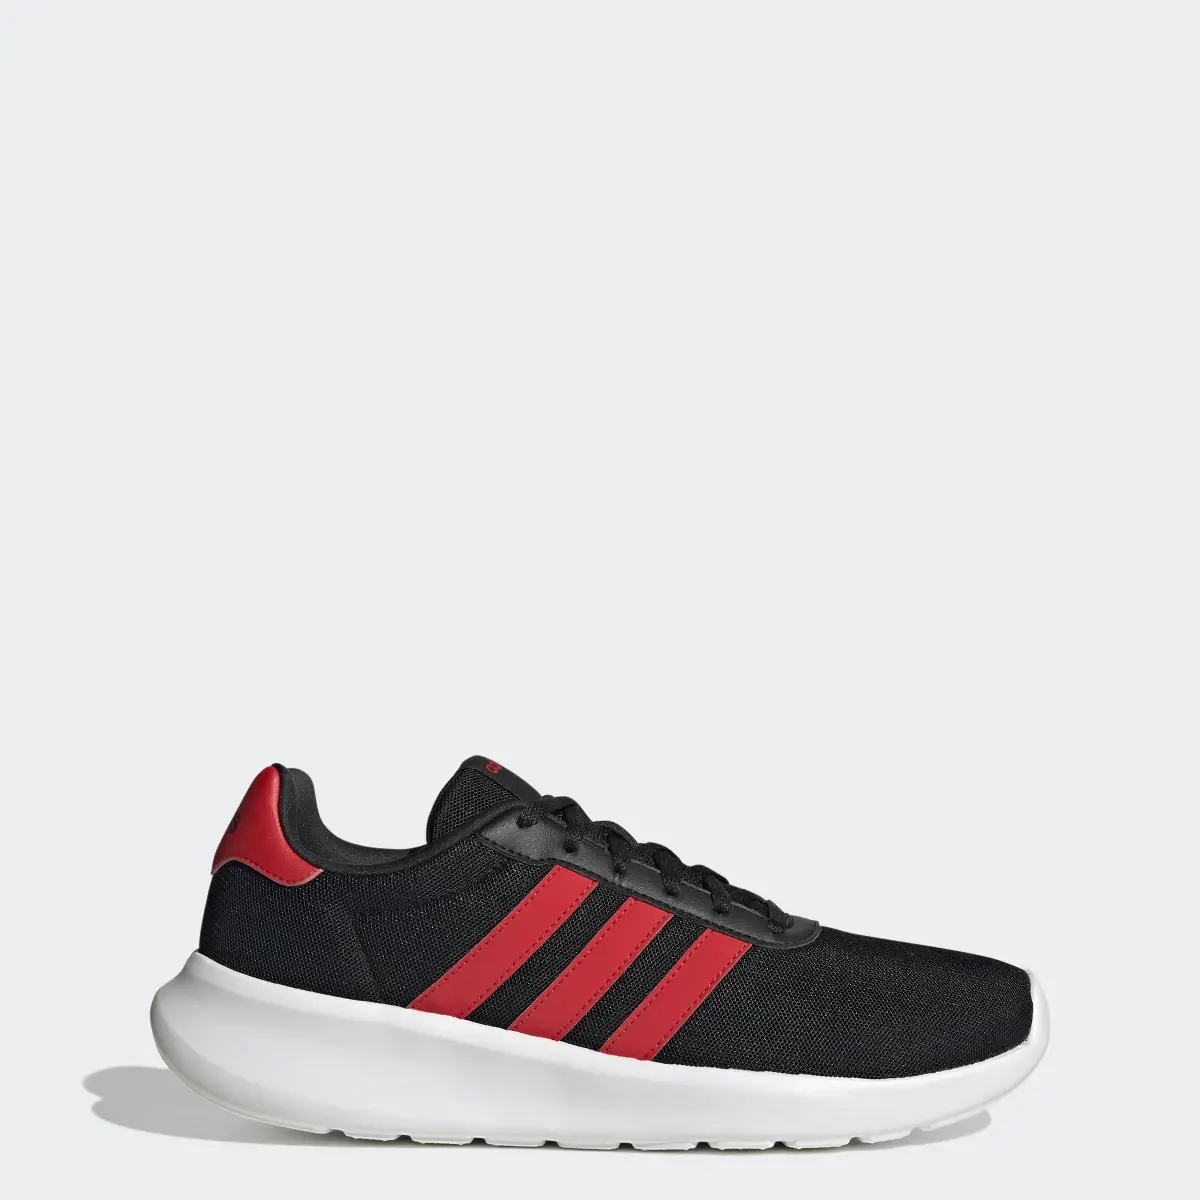 Adidas Lite Racer 3.0 Shoes. 1